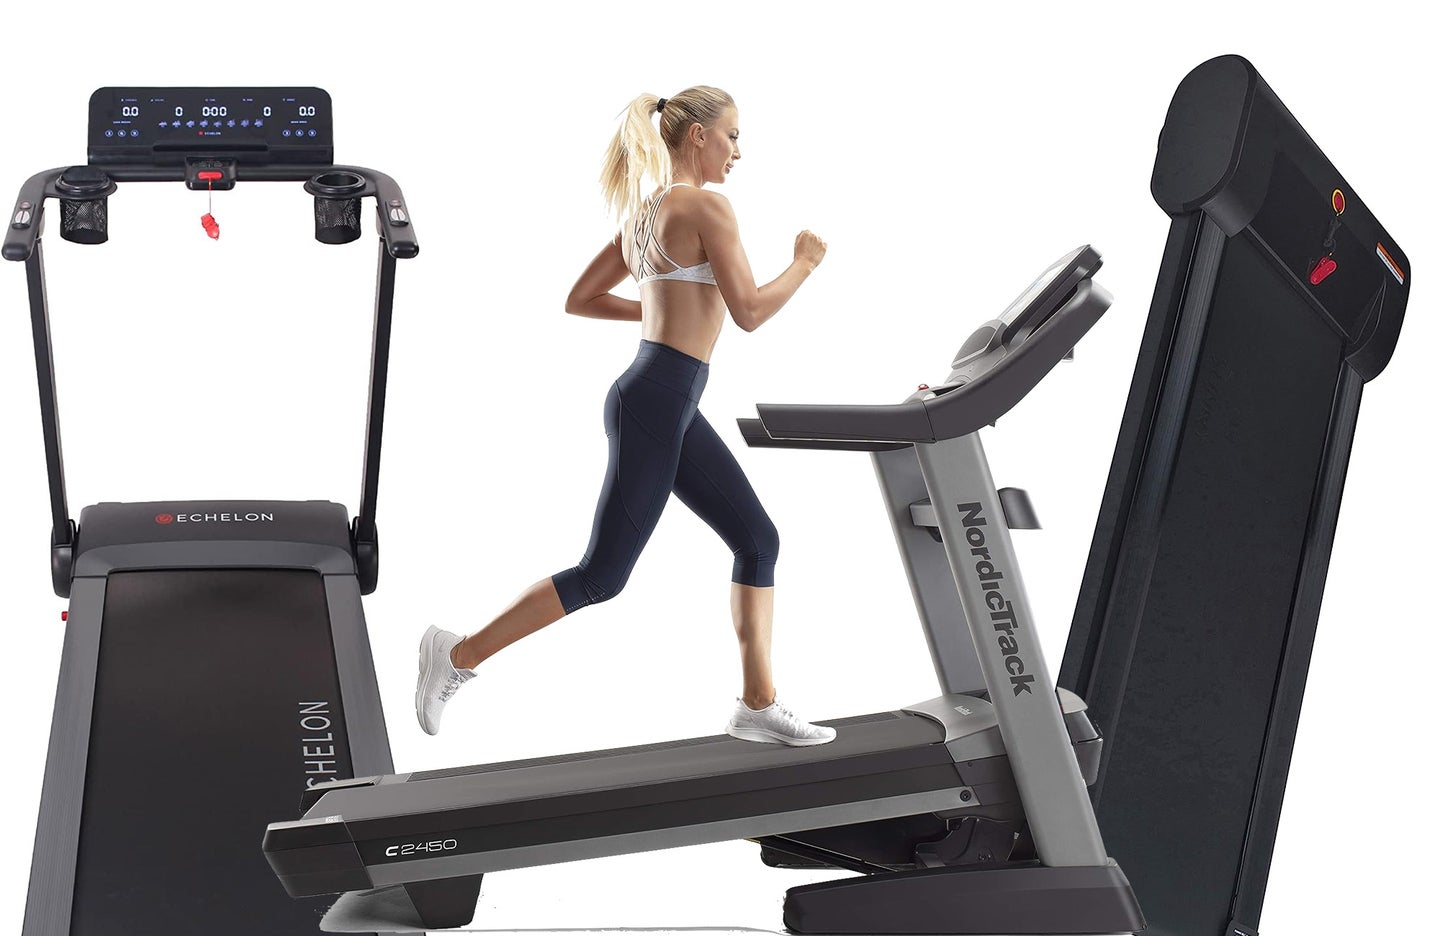 Work out at home and save space with one of the best compact treadmills.